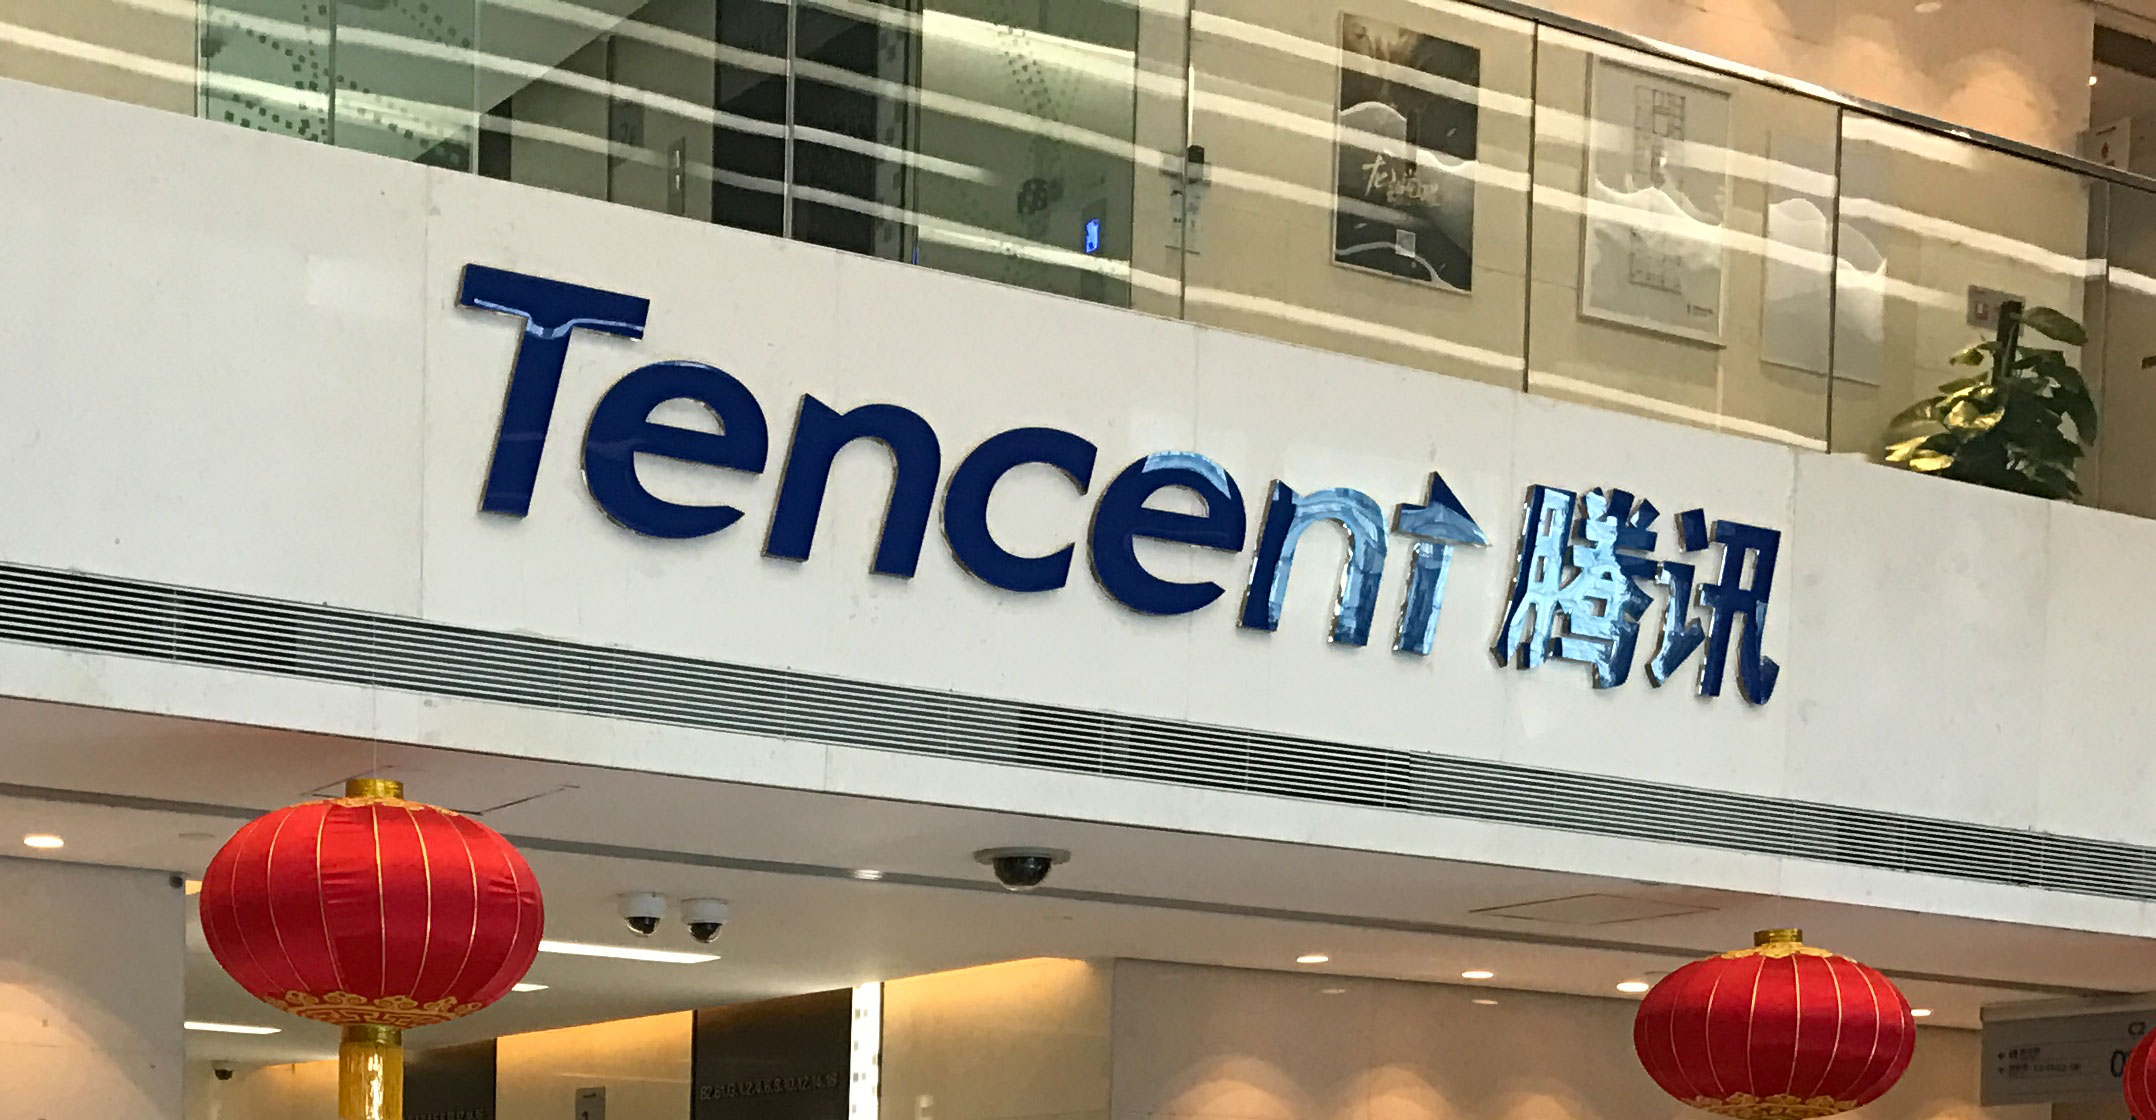 profile tencent china 900b wechat 259bstreetjournal